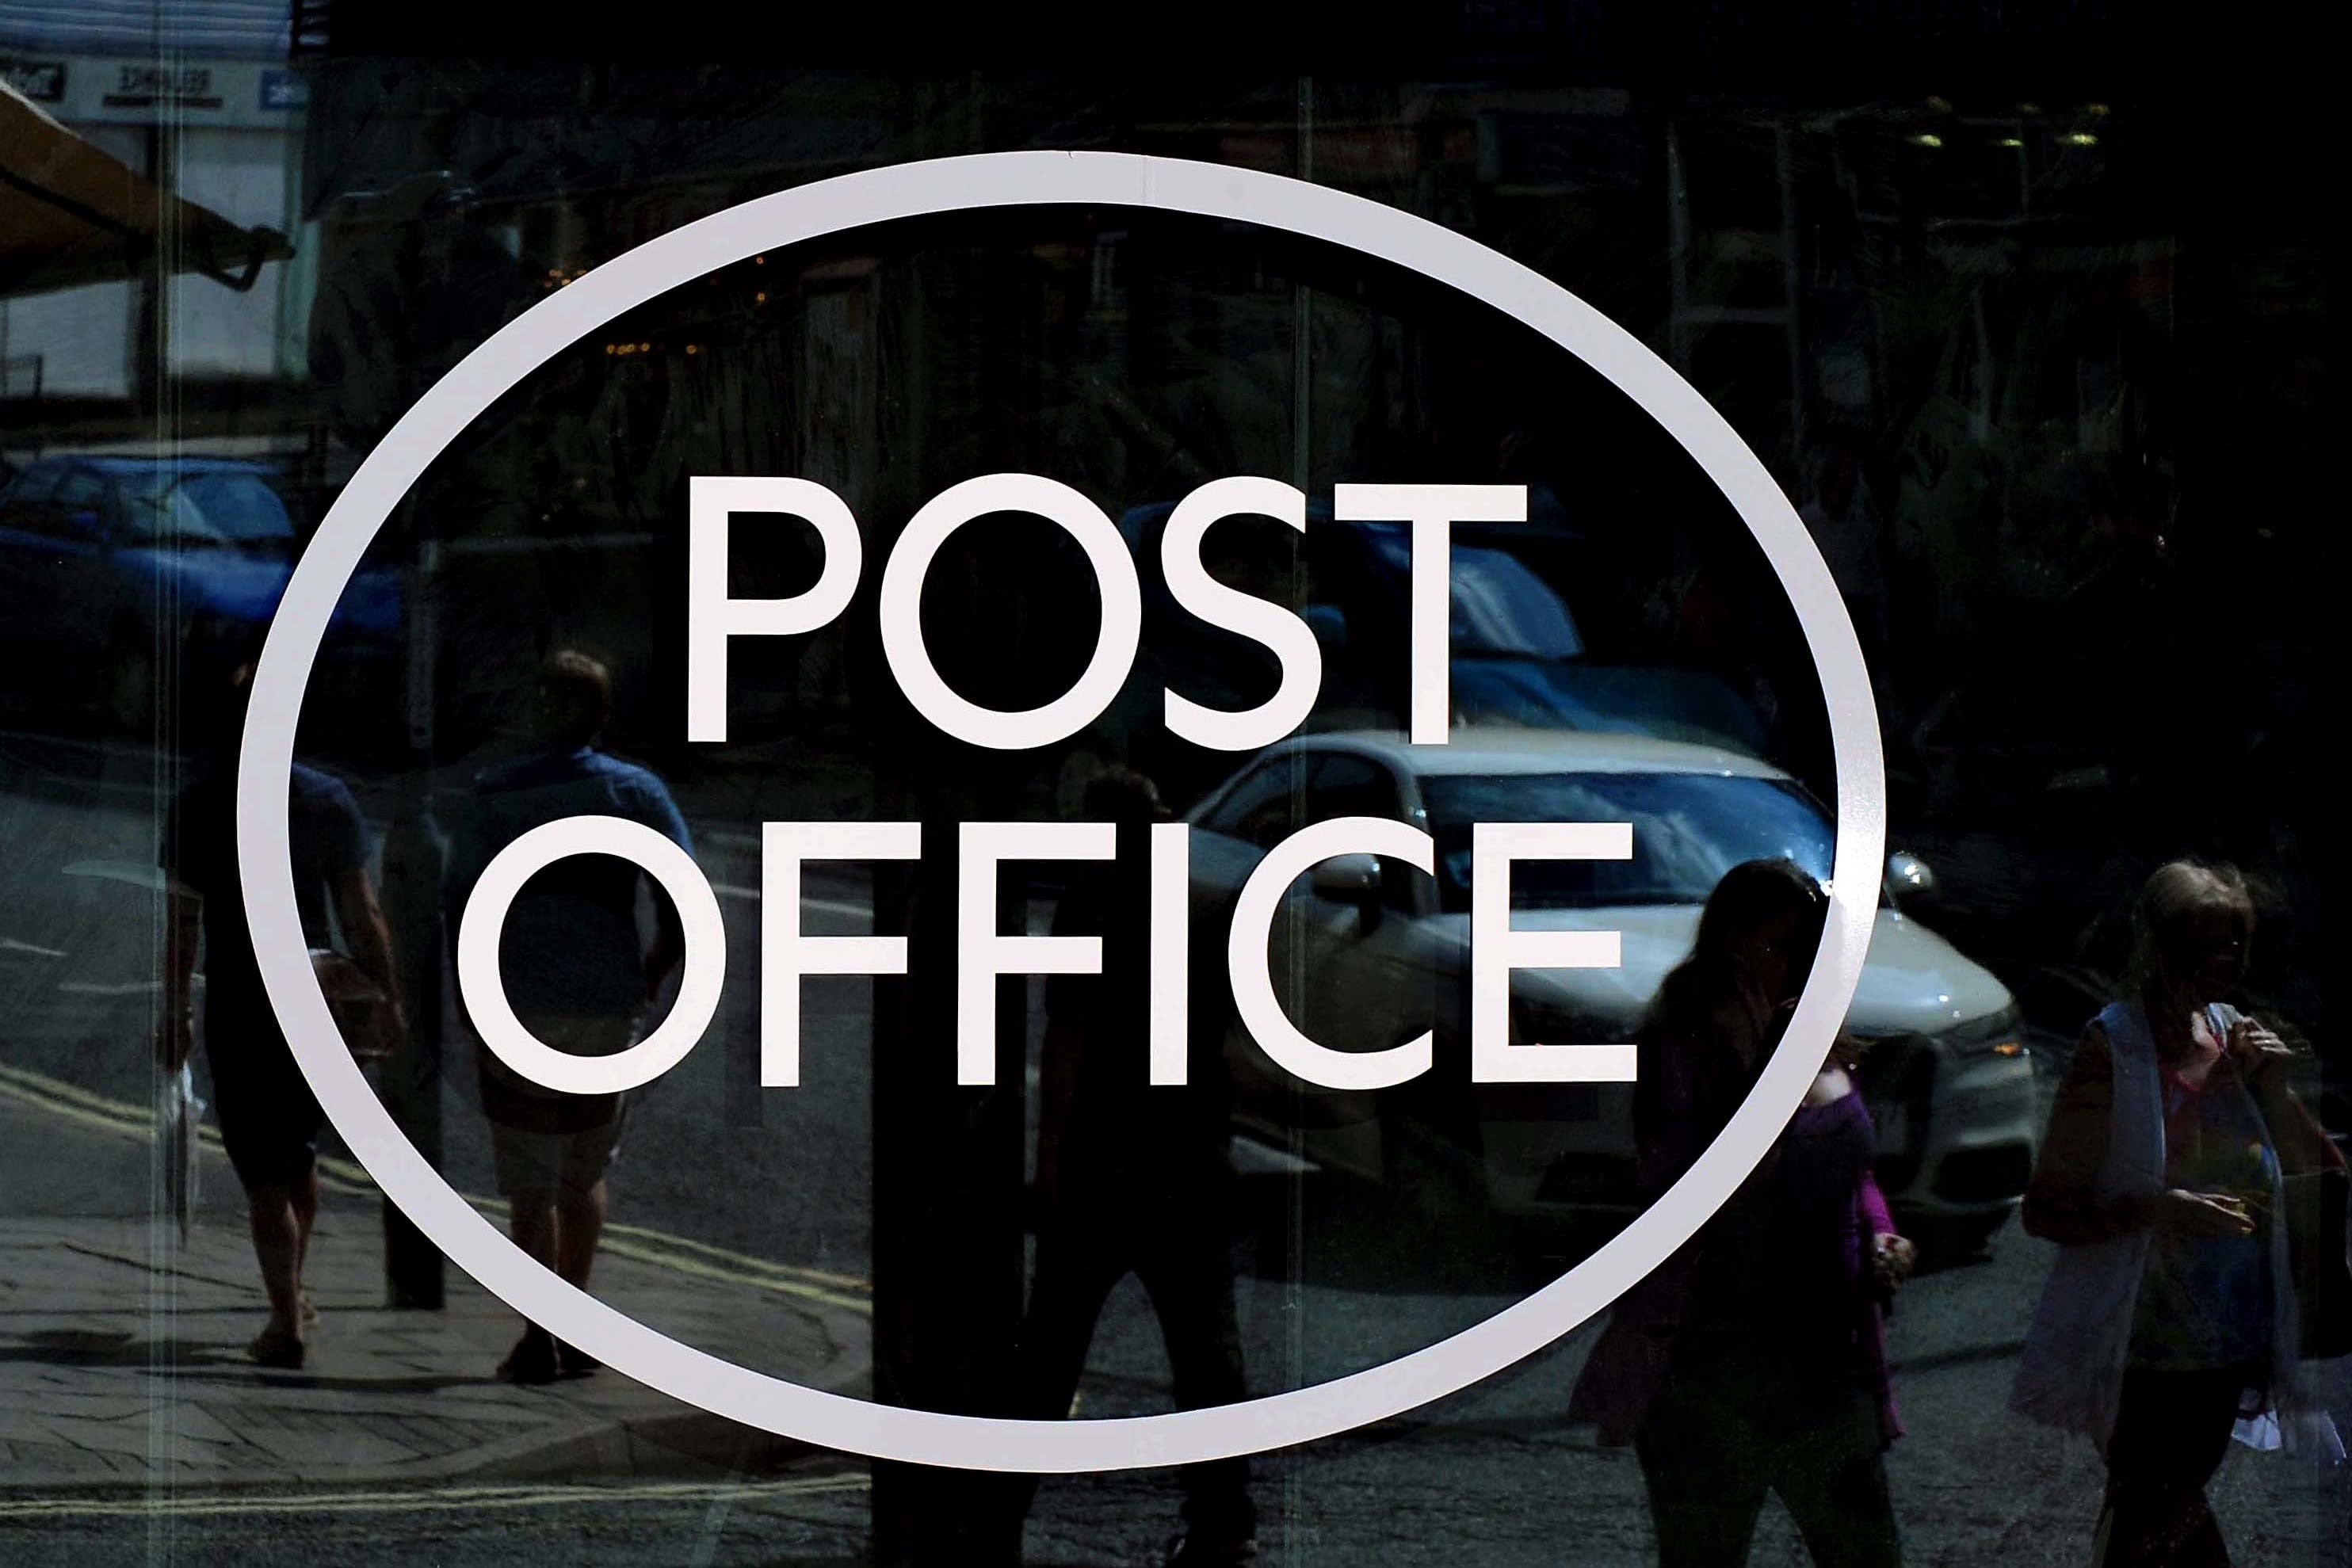 The Crown Office and Procurator Fiscal Service has said the Post Office told it the Horizon system would have no impact on its cases (PA)